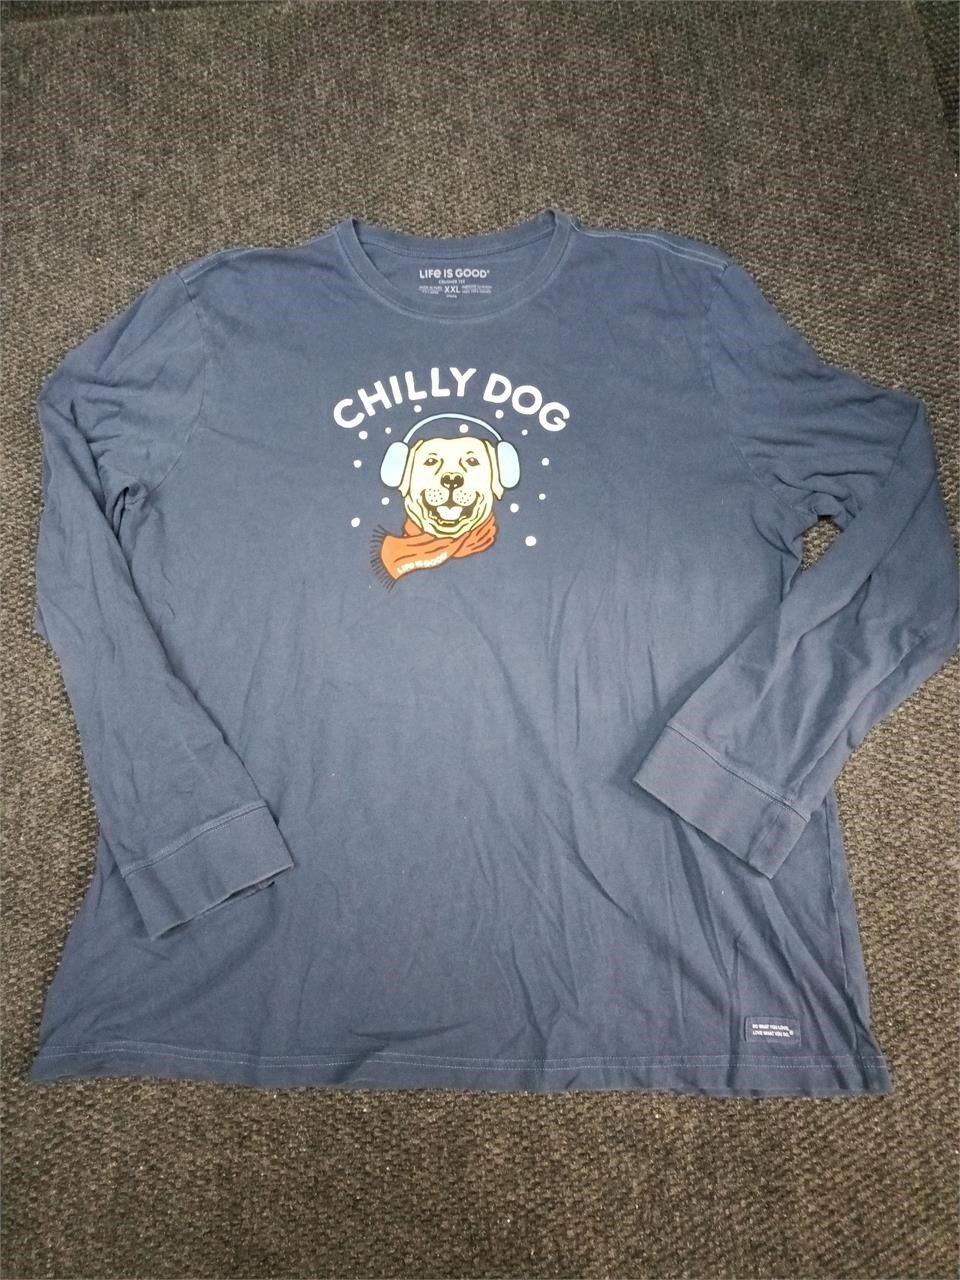 Life is Good Chilly Dog crusher tee, XXL